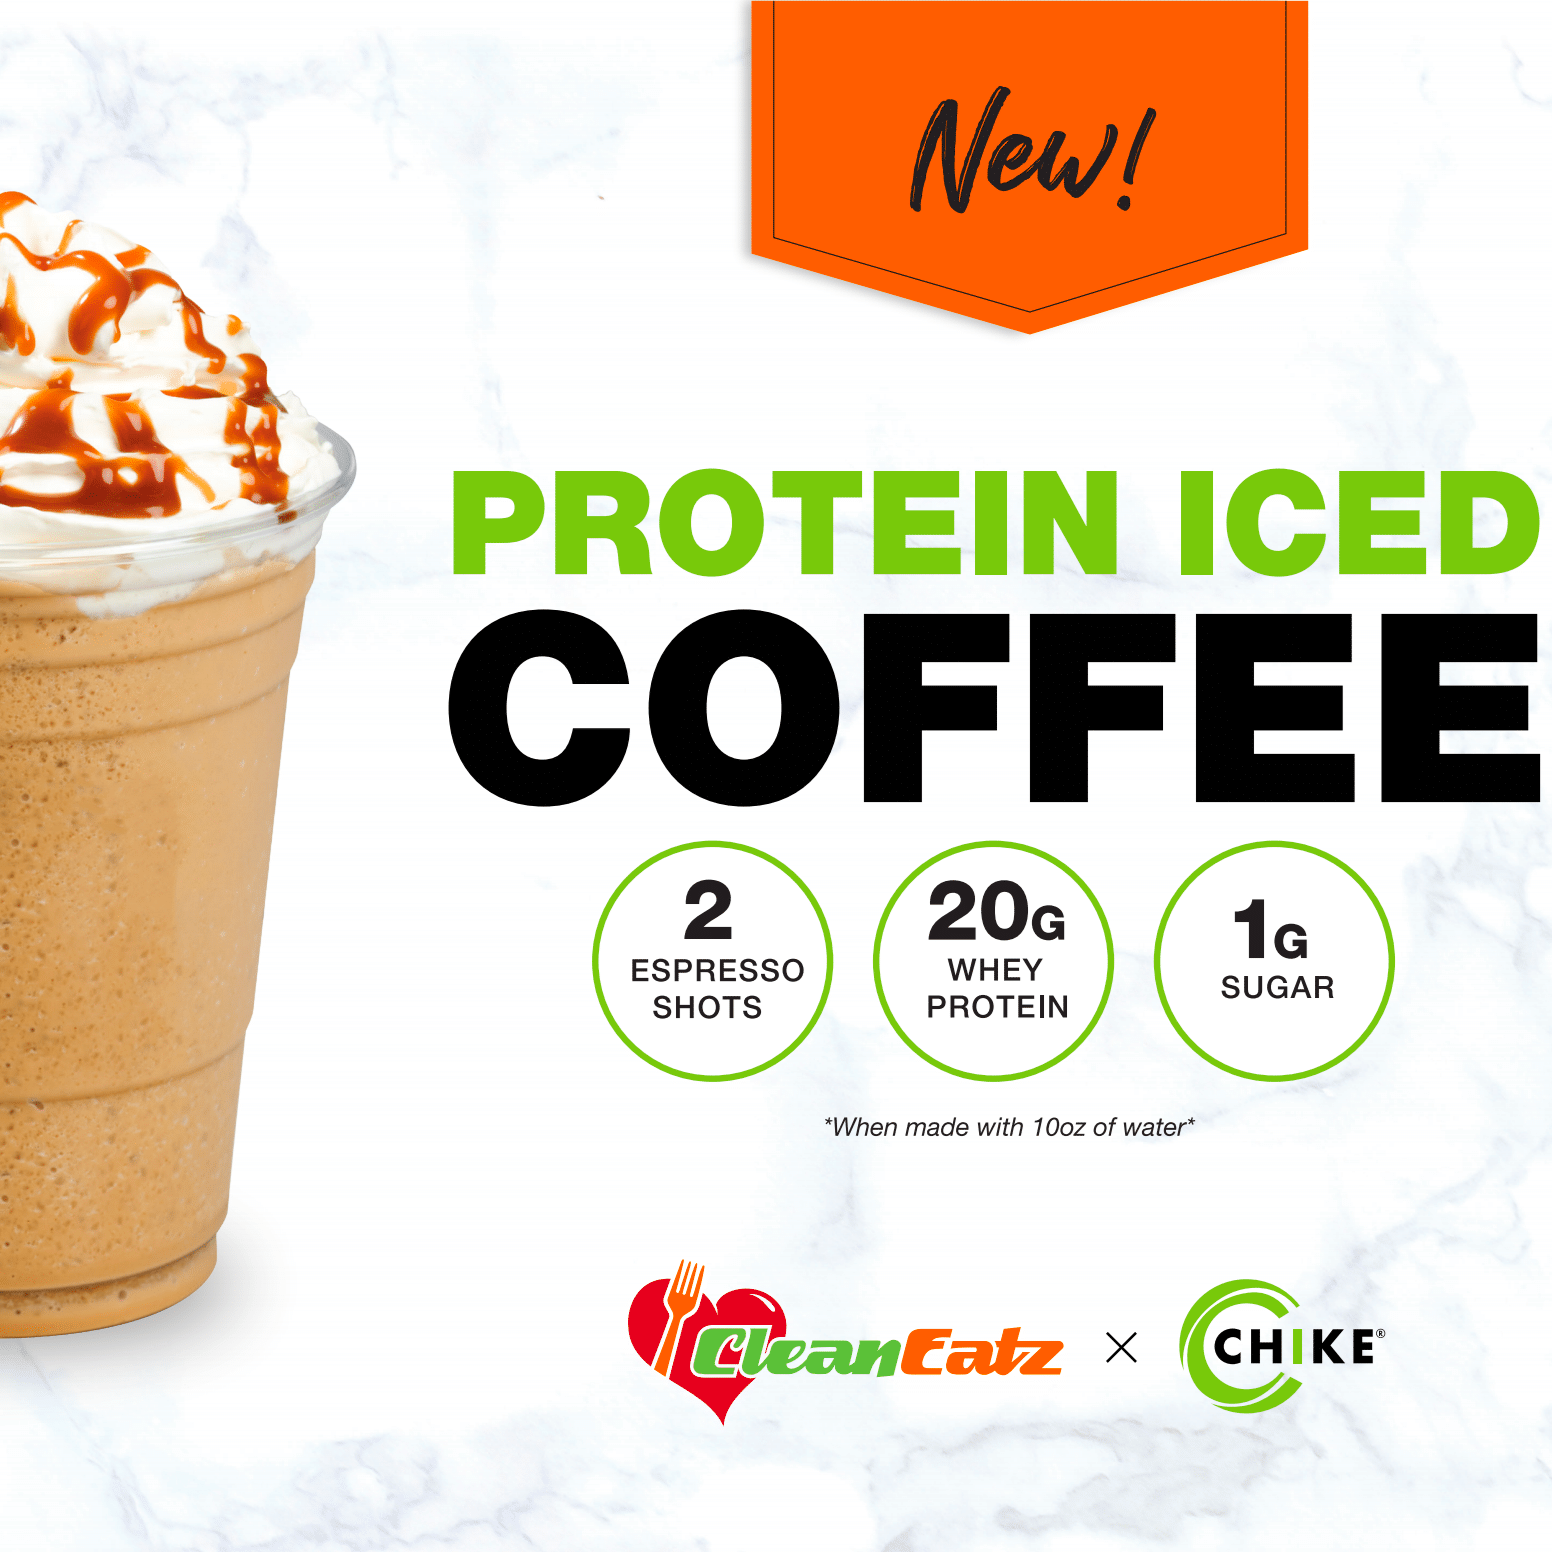 Clean Eatz & Chike Protein Iced Coffee